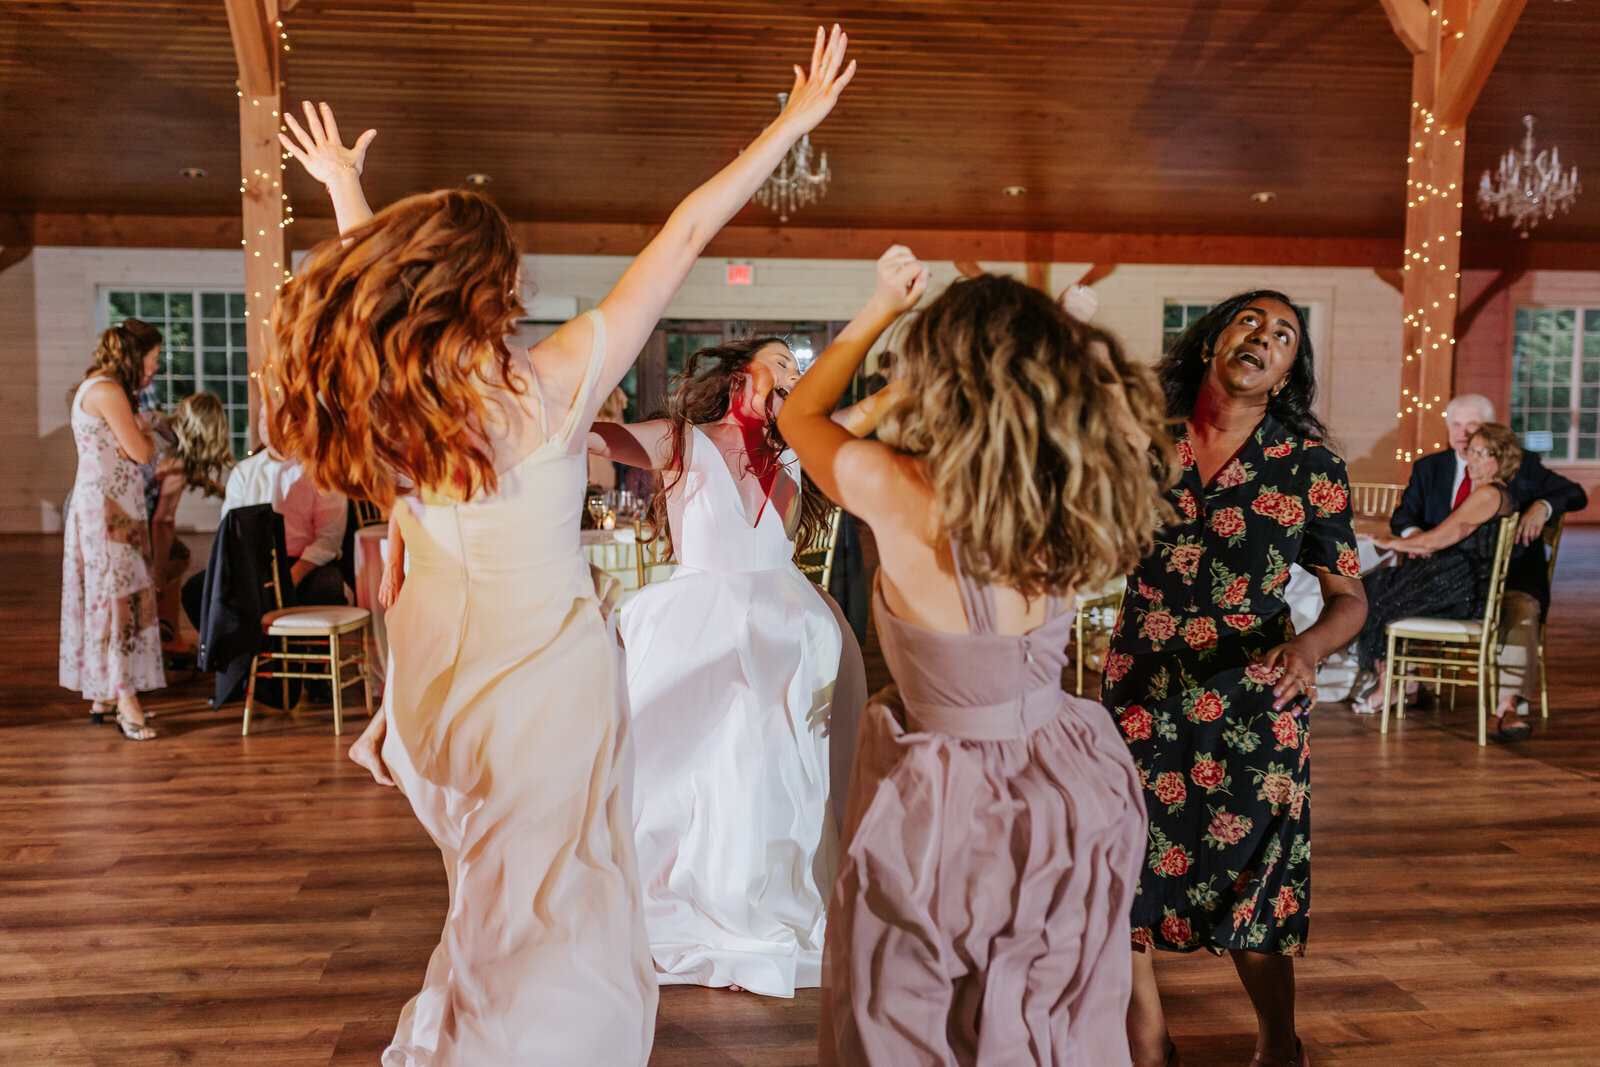 A group of women dance together at a barn wedding reception